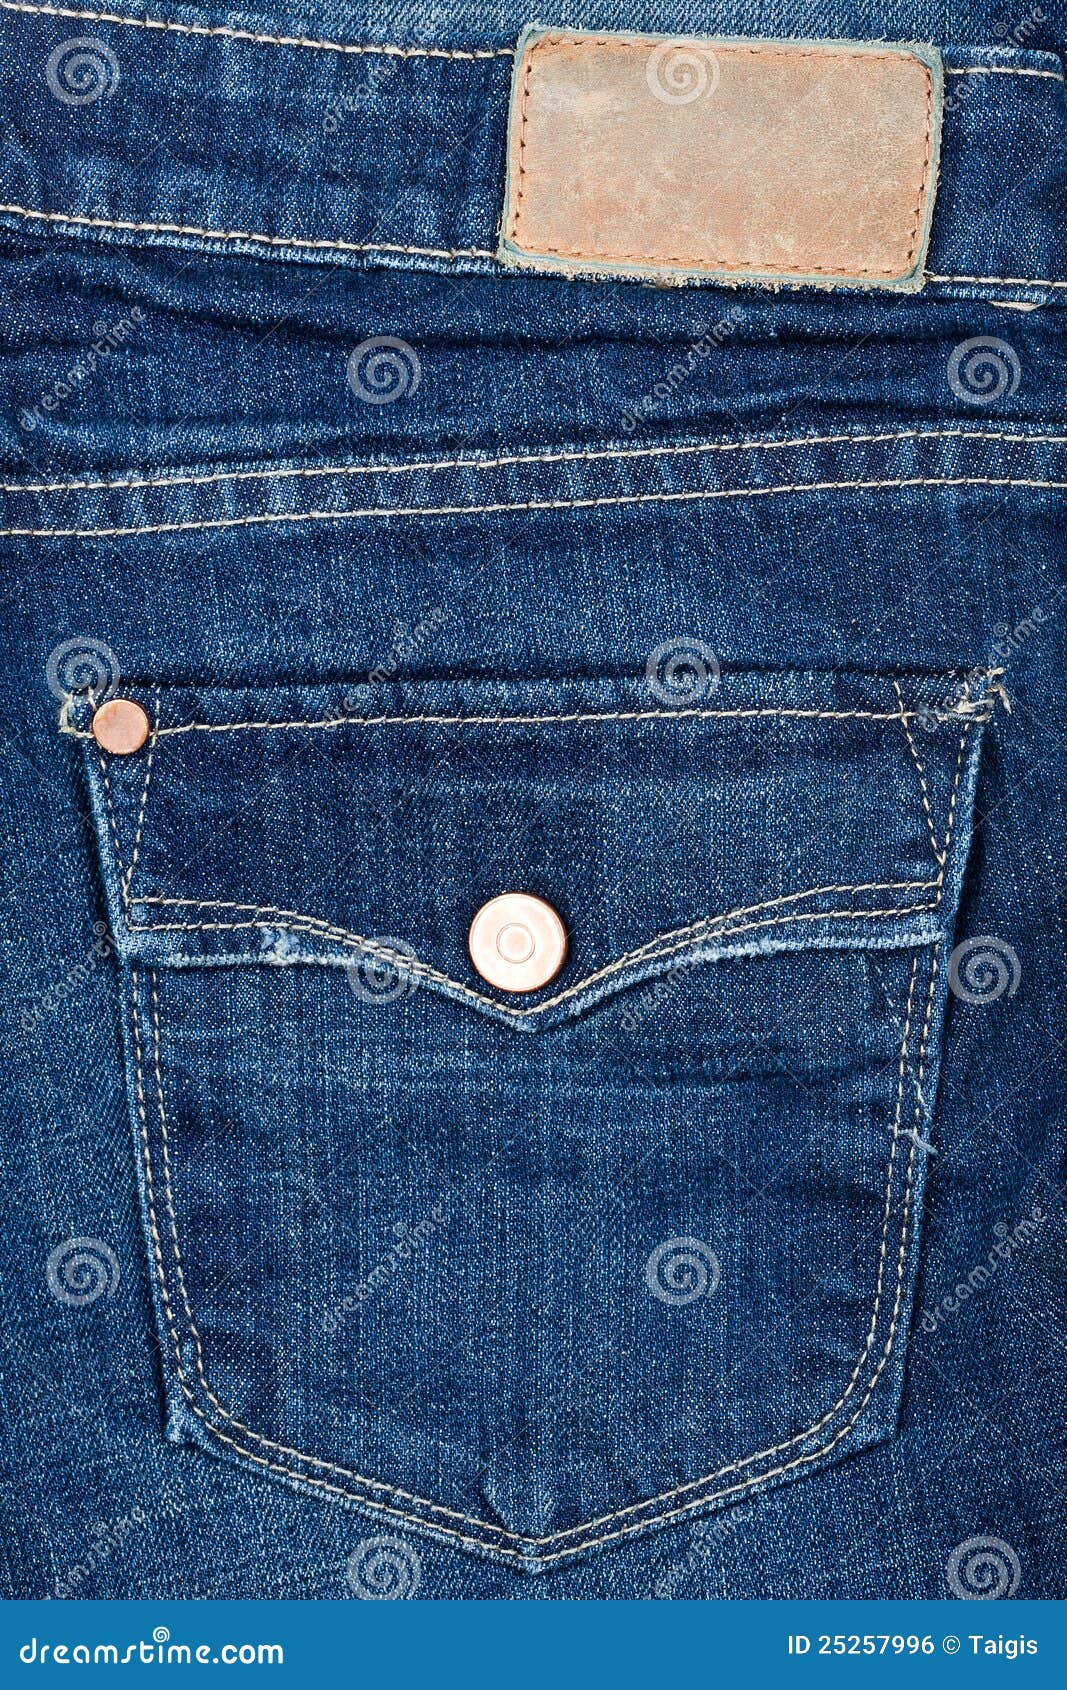 Blue Jeans Fabric with Pocket and Label Stock Photo - Image of pocket ...